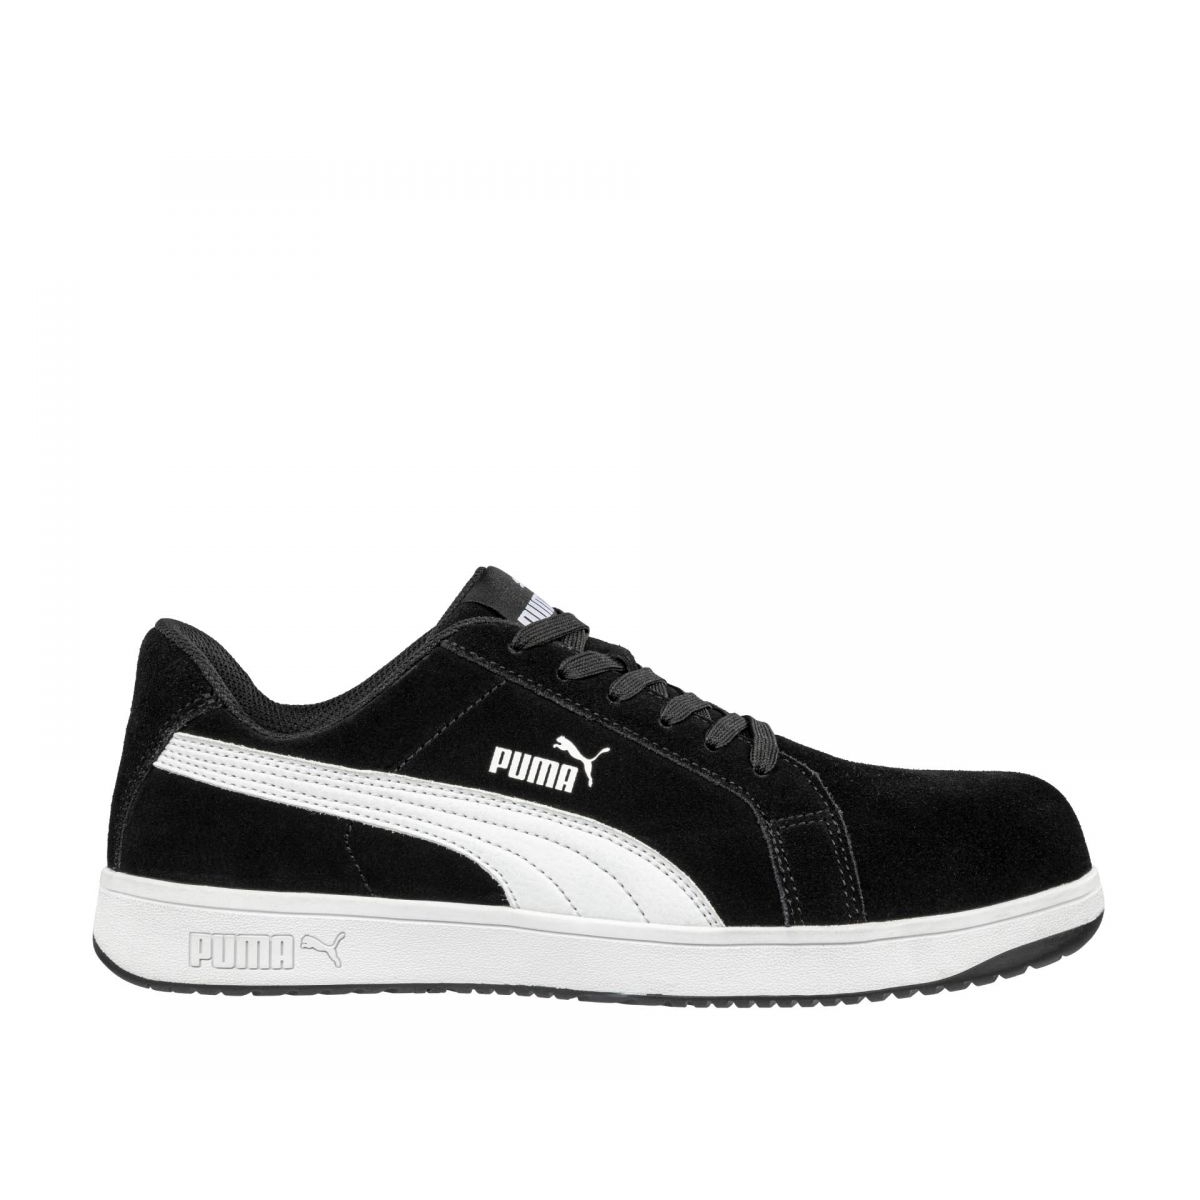 PUMA Safety Men's Iconic Low Composite Toe EH Work Shoes Black Suede - 640015 ONE SIZE BLACK - BLACK, 7.5